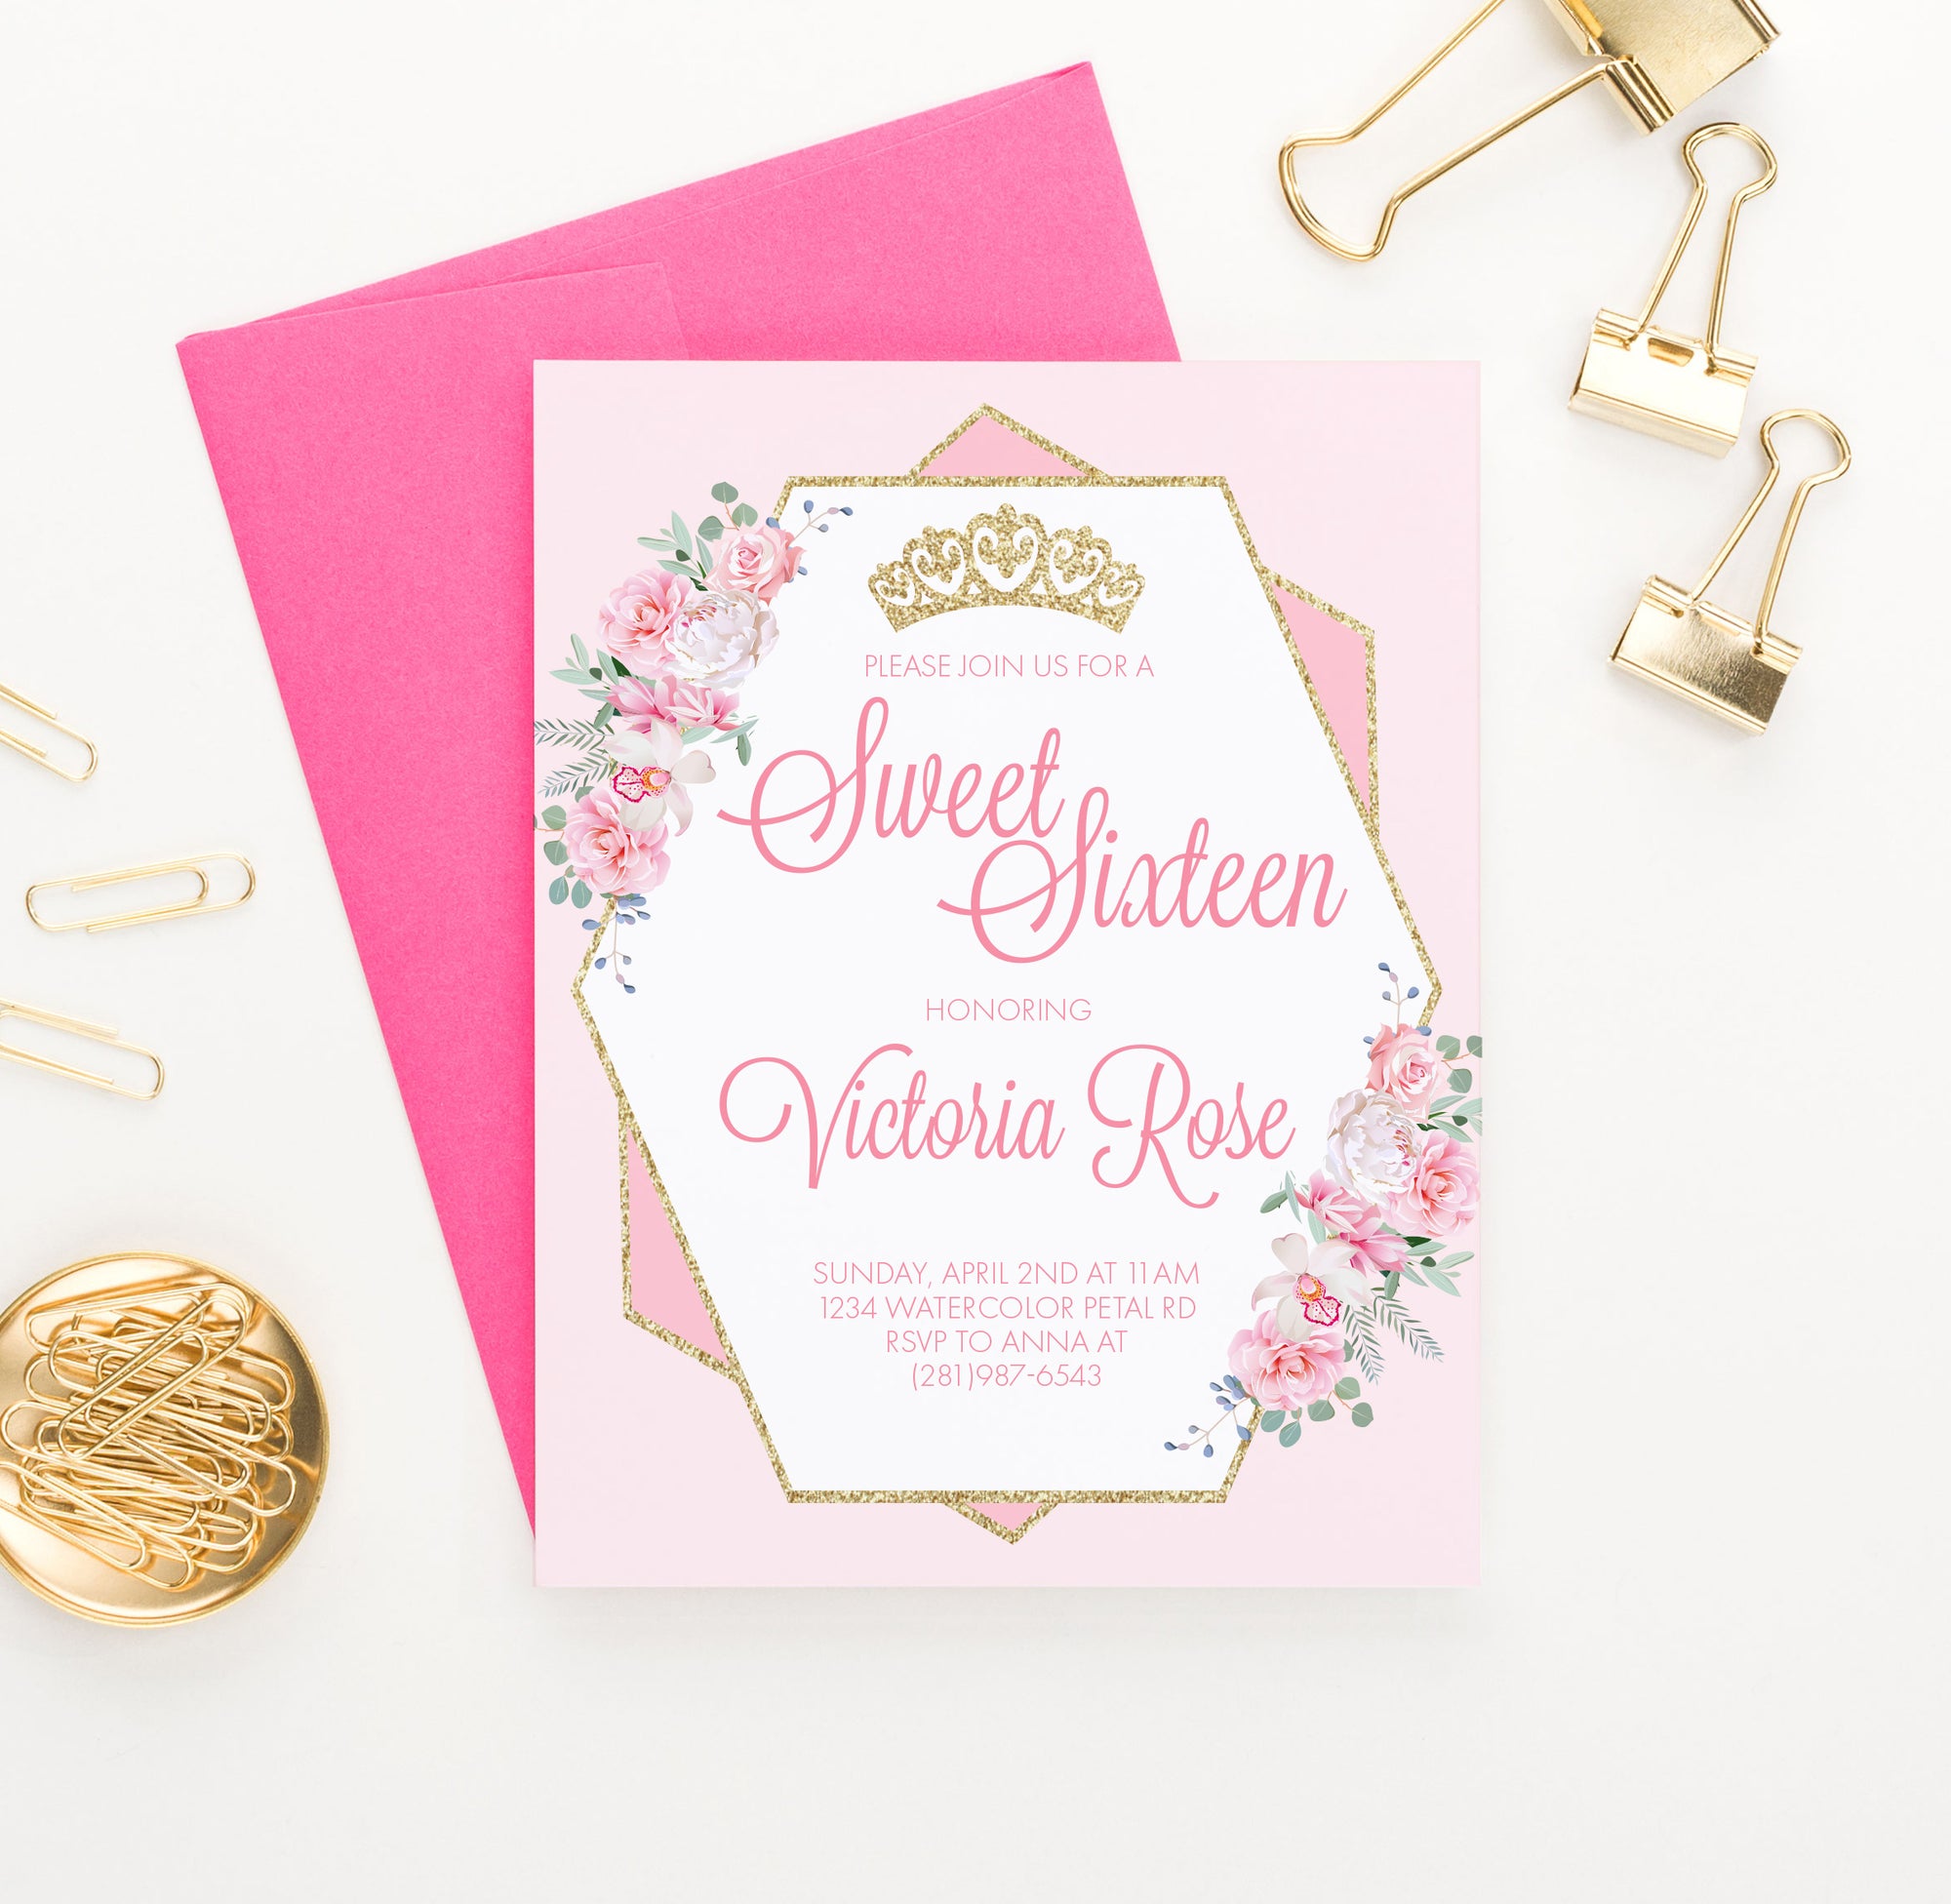 Personalized Pink Sweet Sixteen Invitations With Crown And Florals